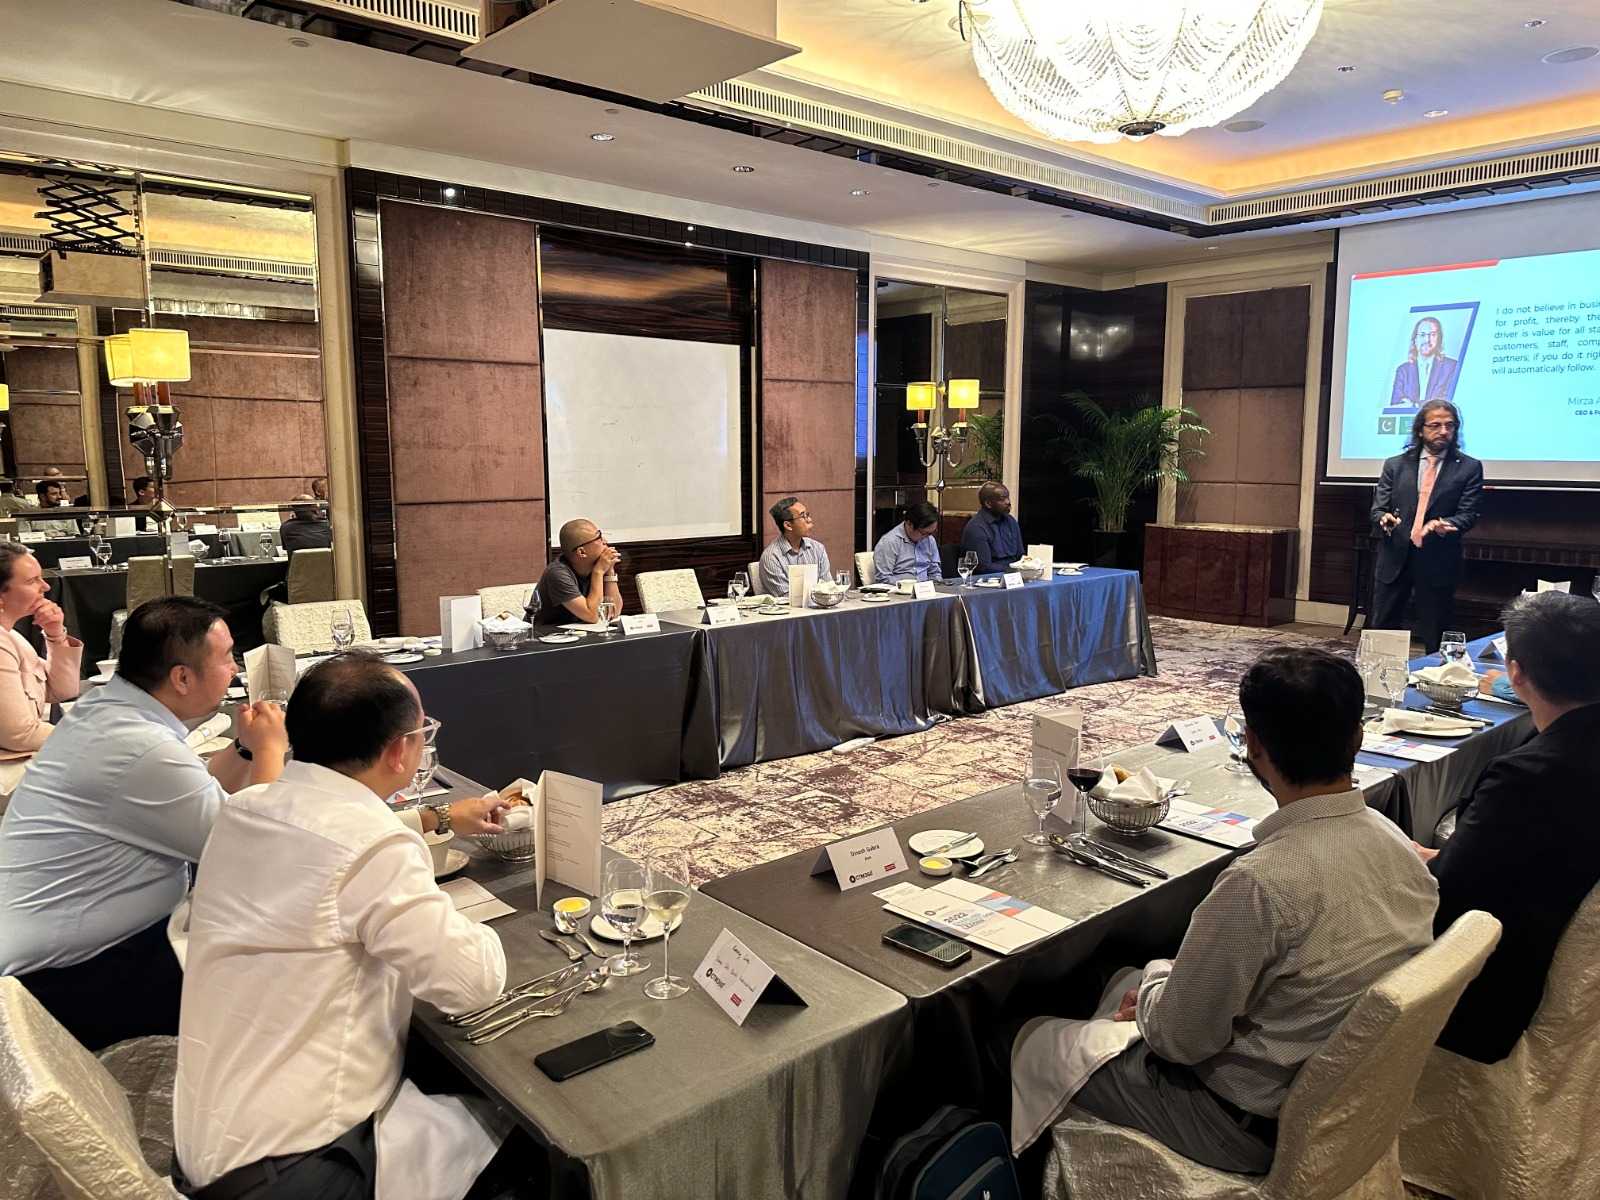 CTM360 hosts cyber resilience roundtable for senior leaders in Singapore's financial industry